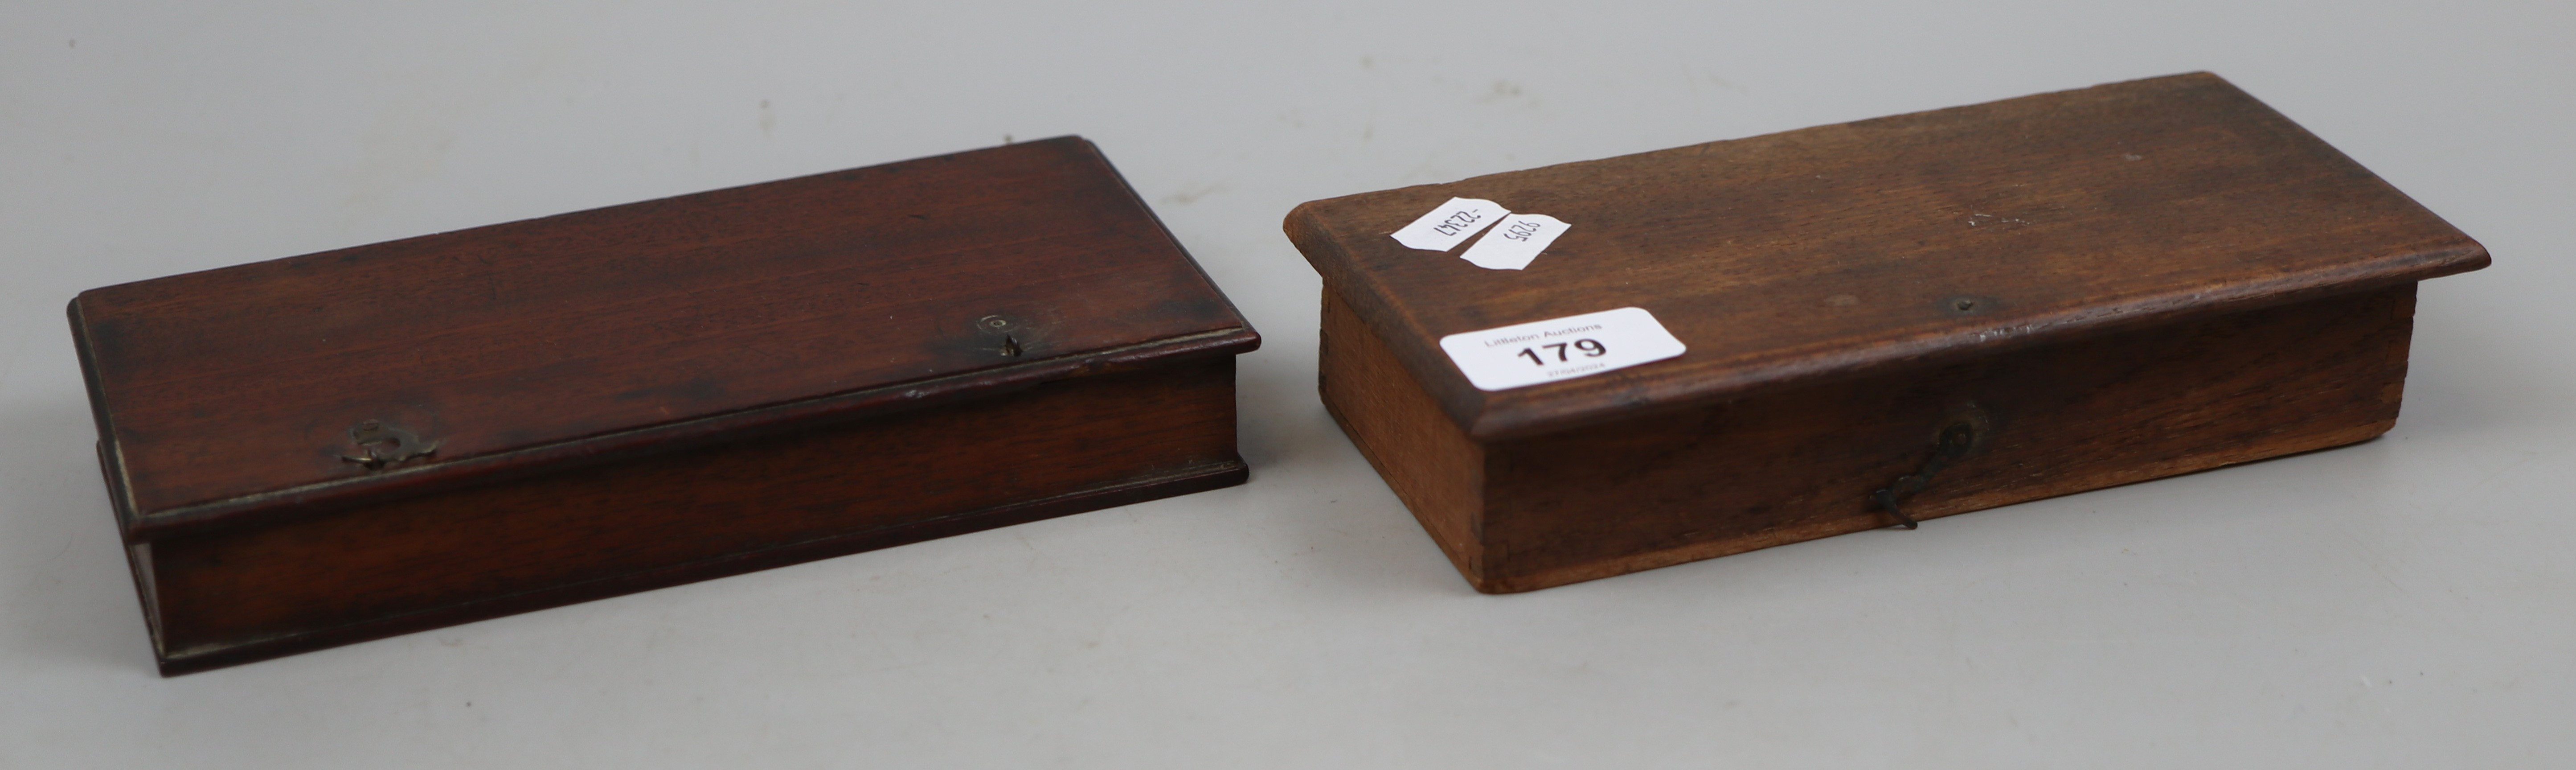 2 antique wooden cased apothecary scales - Image 4 of 4